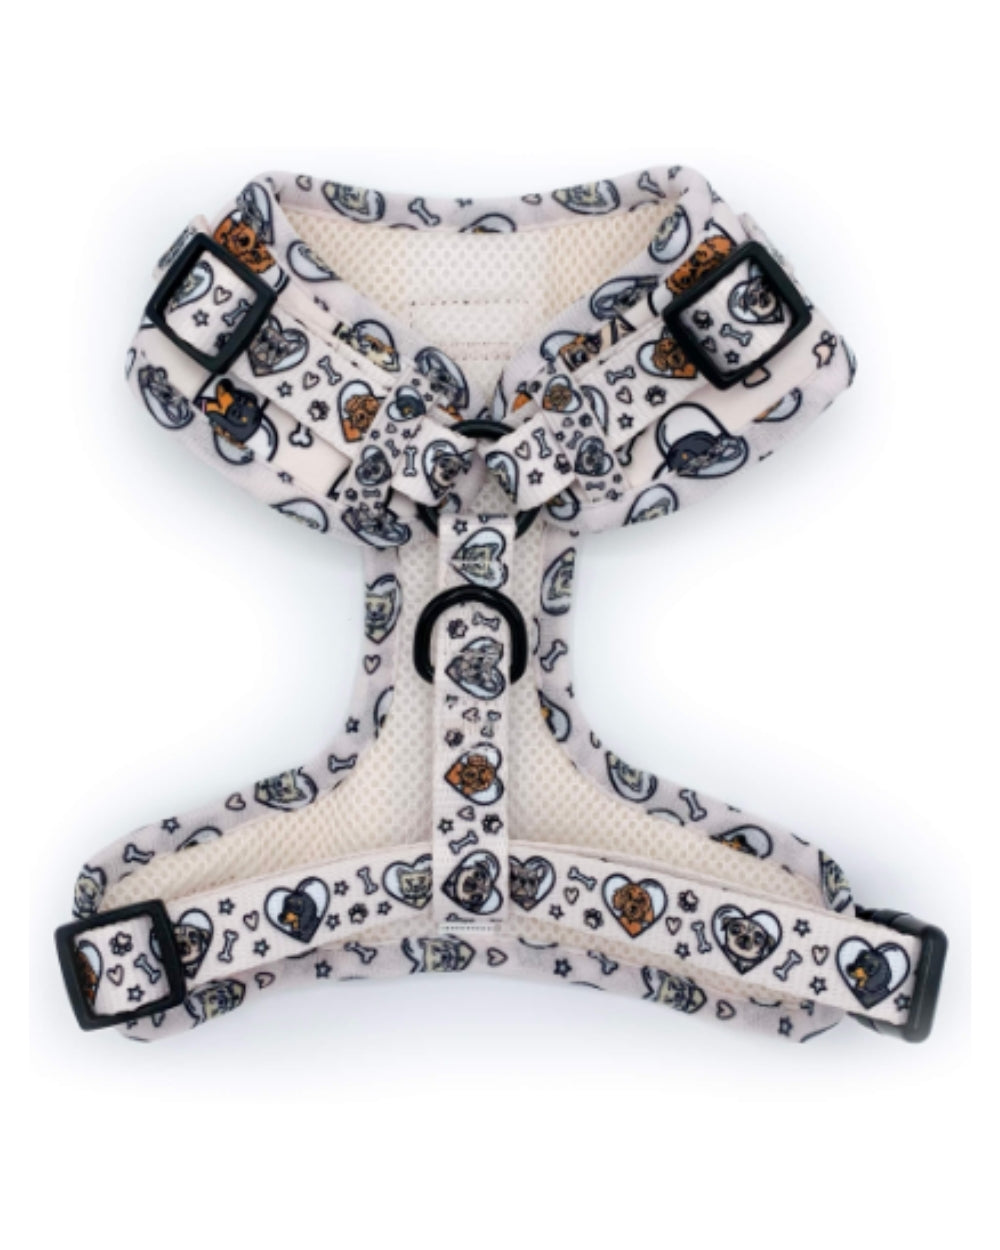 Dogs For Days Adjustable Dog Harness